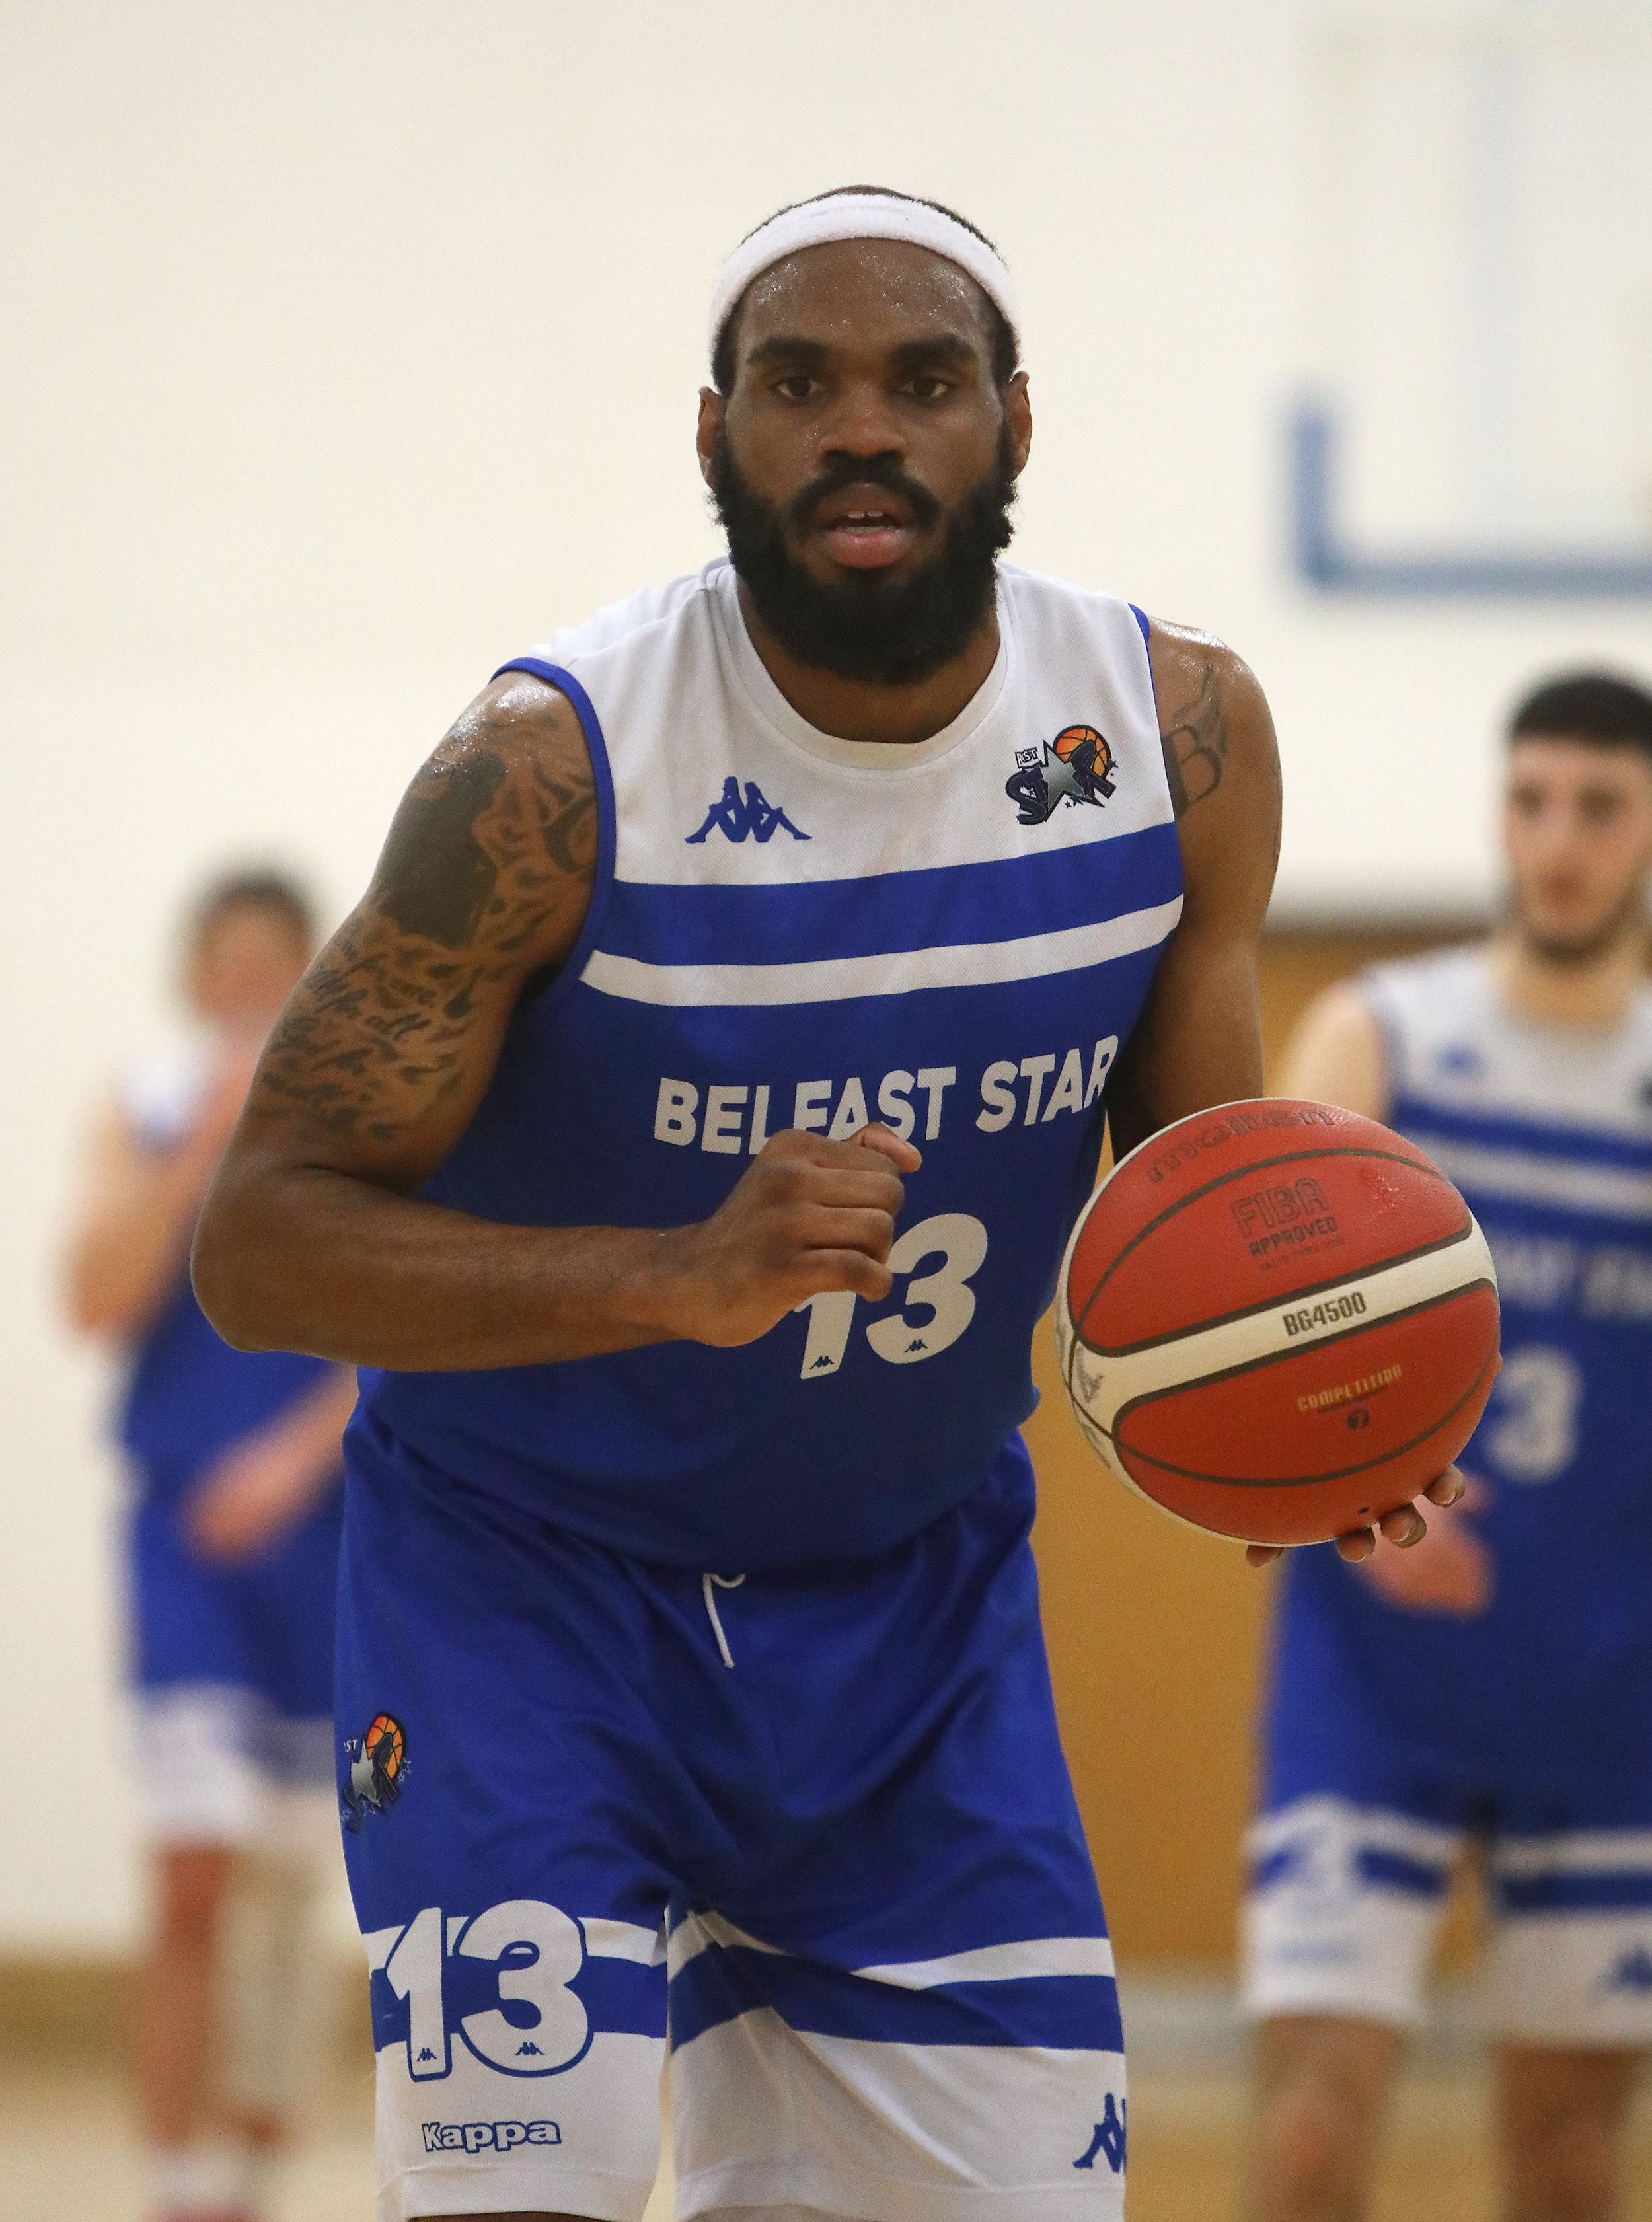 Shon Briggs impressed in his home debut last weekend and has added a new dimension for Belfast Star ahead of this weekend\'s games at La Salle Sports Hall against Bright DCU Saints and C&S Neptune